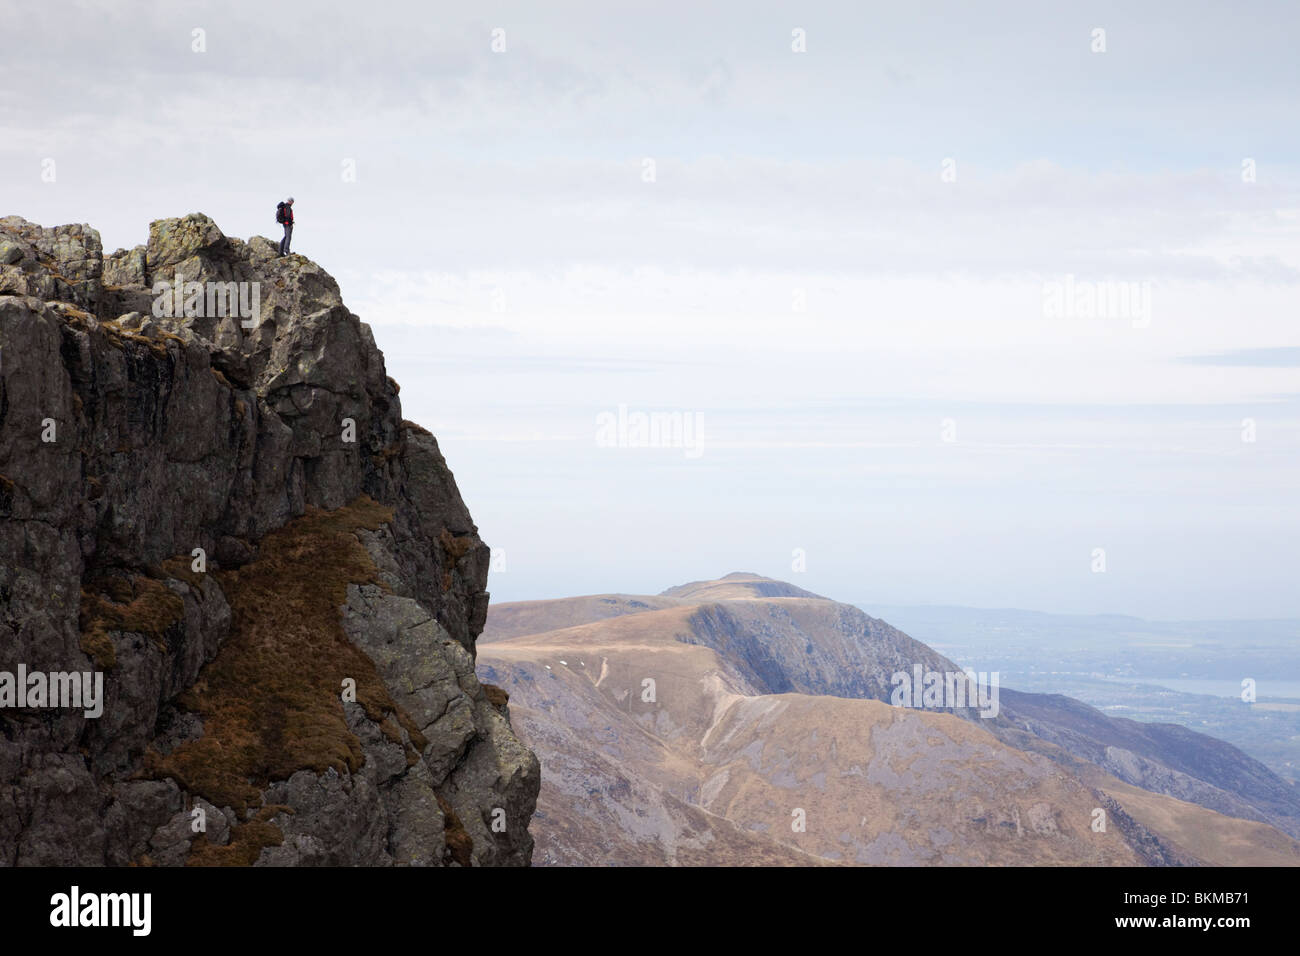 Man standing alone on a craggy mountain top with a view beyond. Glyder Fawr Ogwen Snowdonia National Park North Wales UK Britain Stock Photo